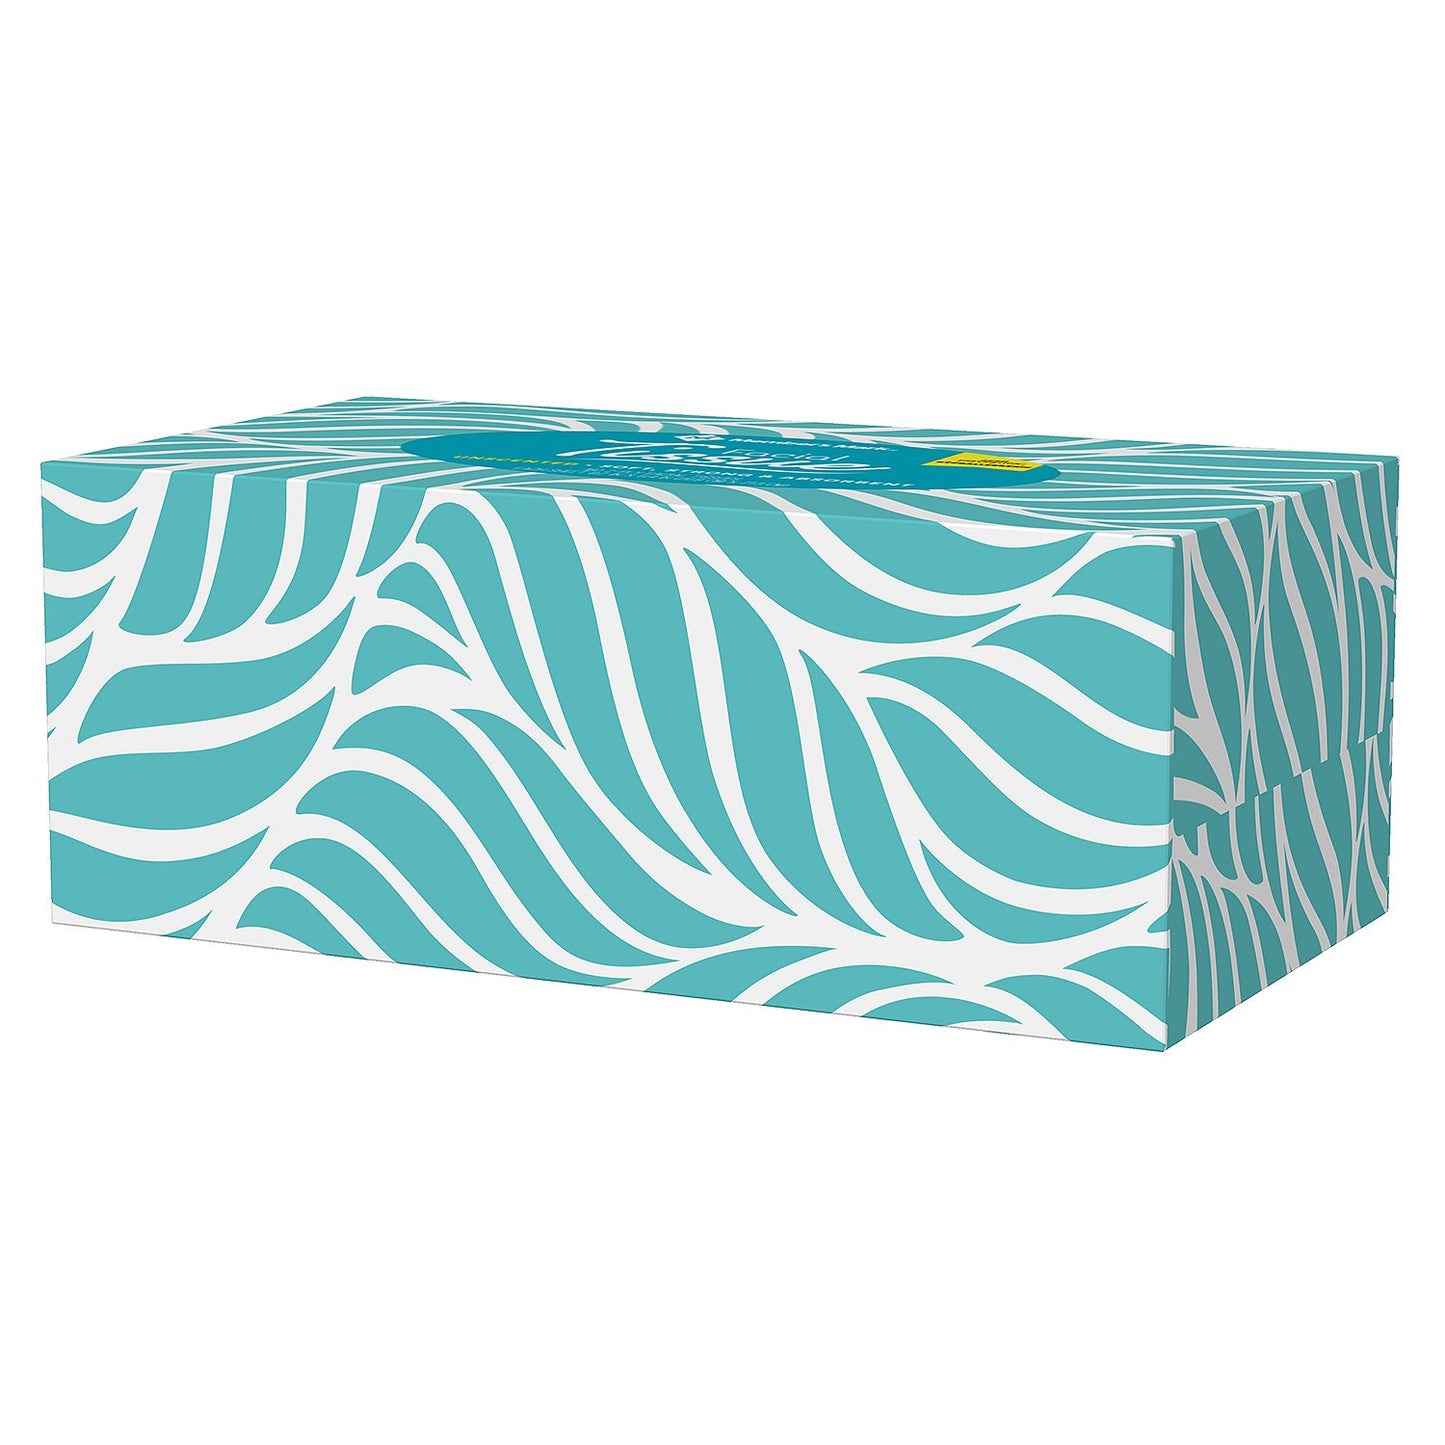 2-Ply Unscented Facial Tissue (12 ct.,160 tissues per box)